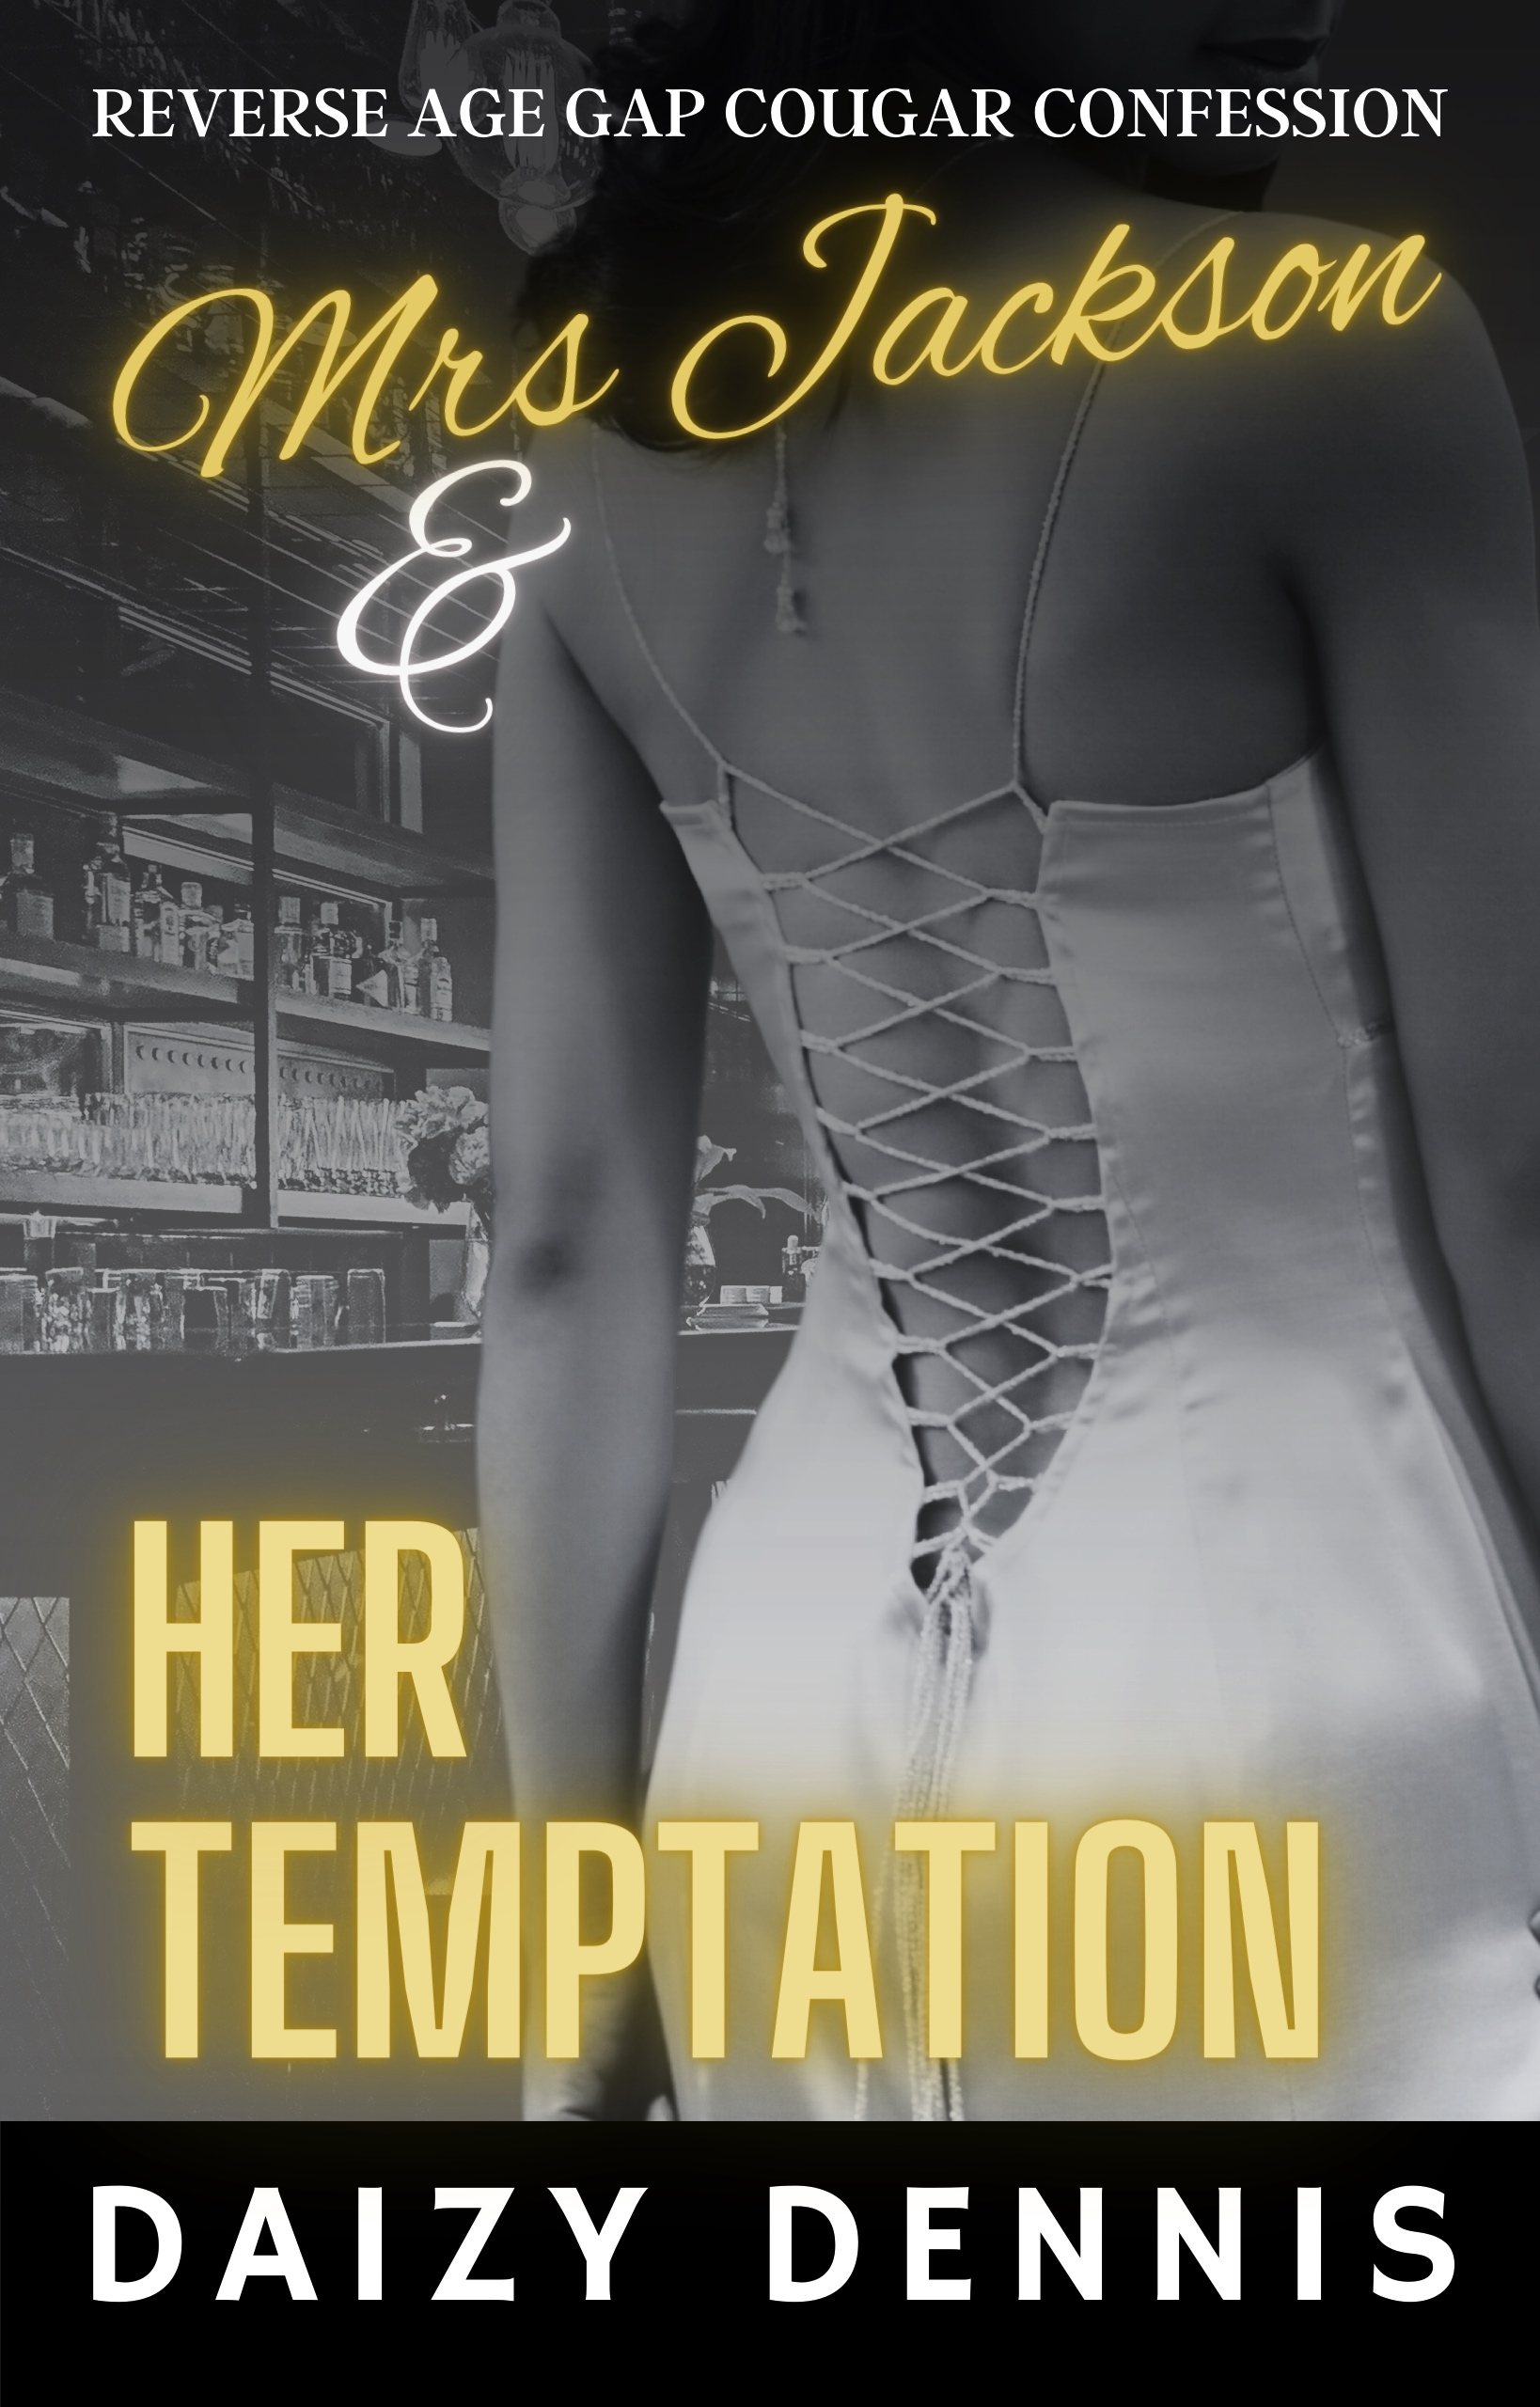 Mrs Jackson and Her Temptation book cover